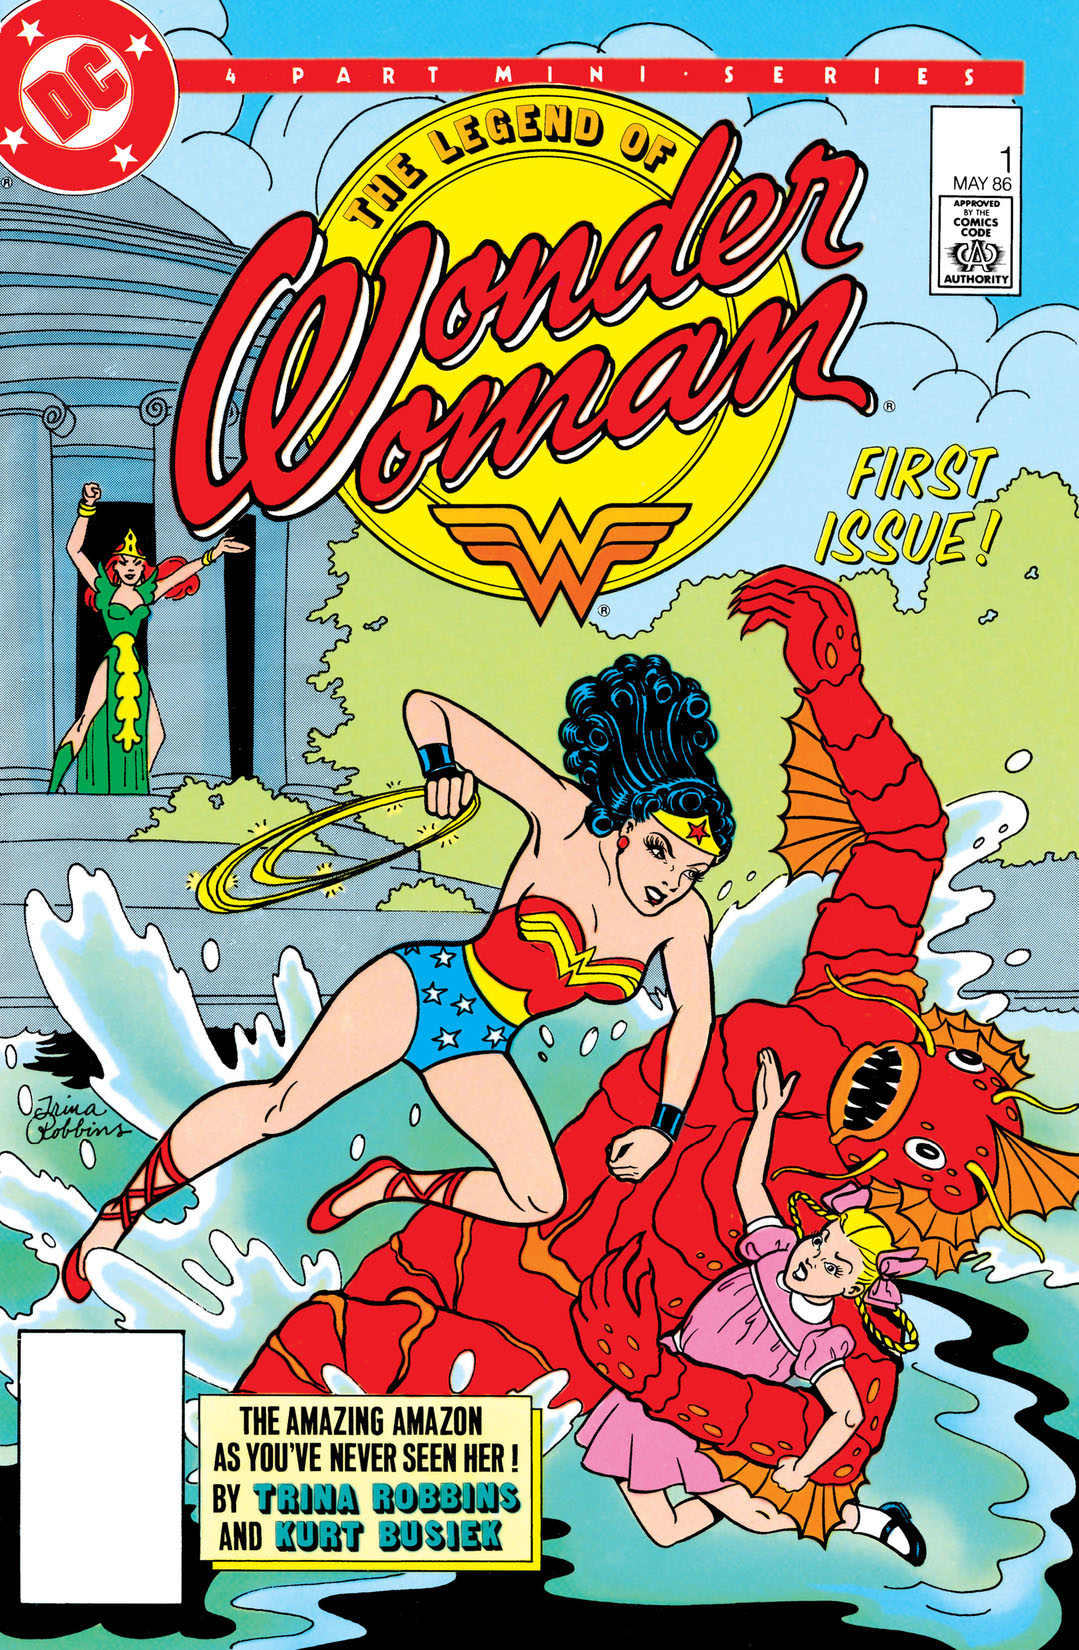 The Legend of Wonder Woman (1986-) #1 preview images